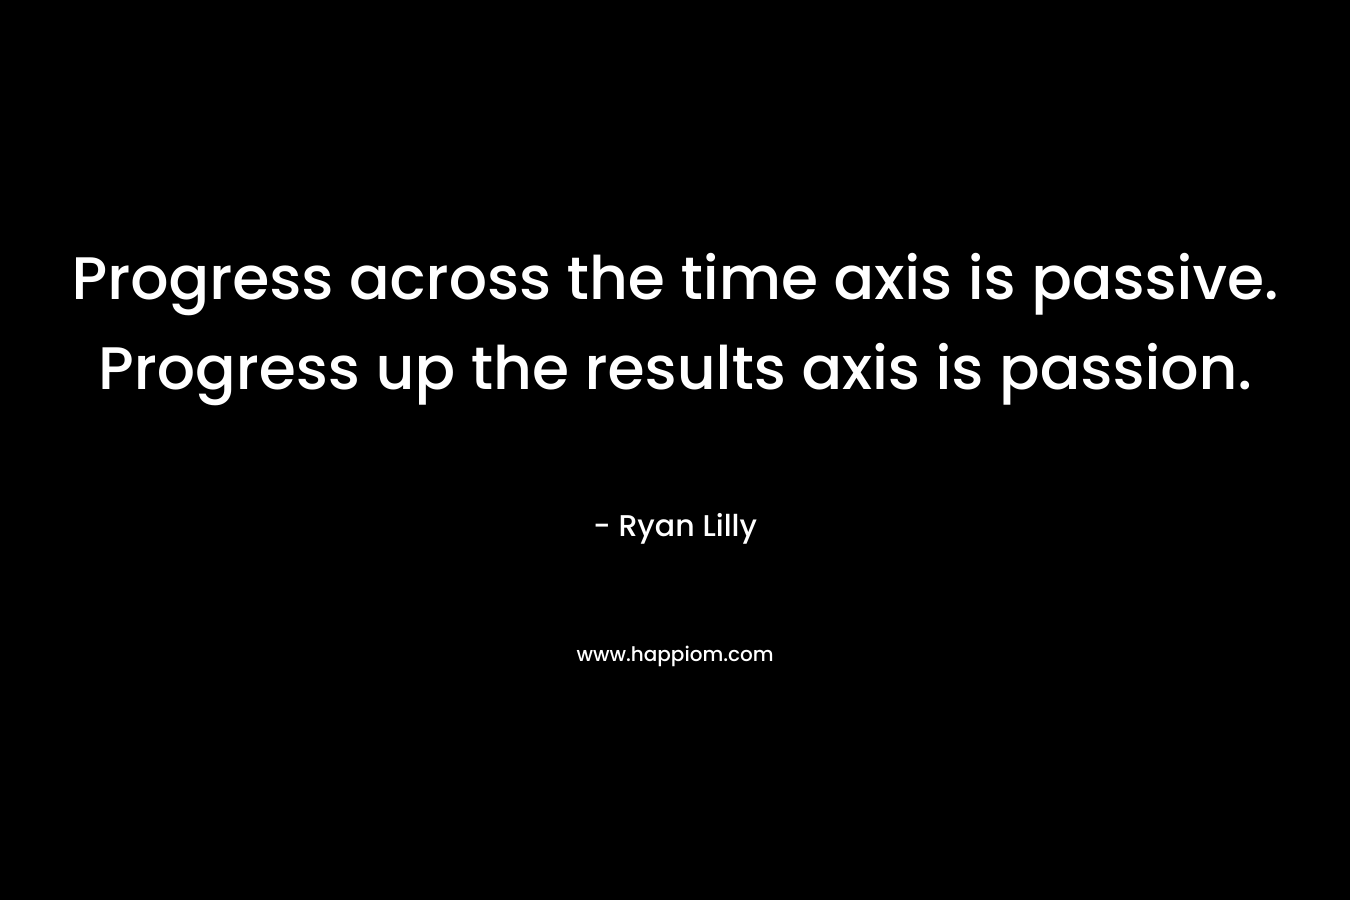 Progress across the time axis is passive. Progress up the results axis is passion. – Ryan Lilly